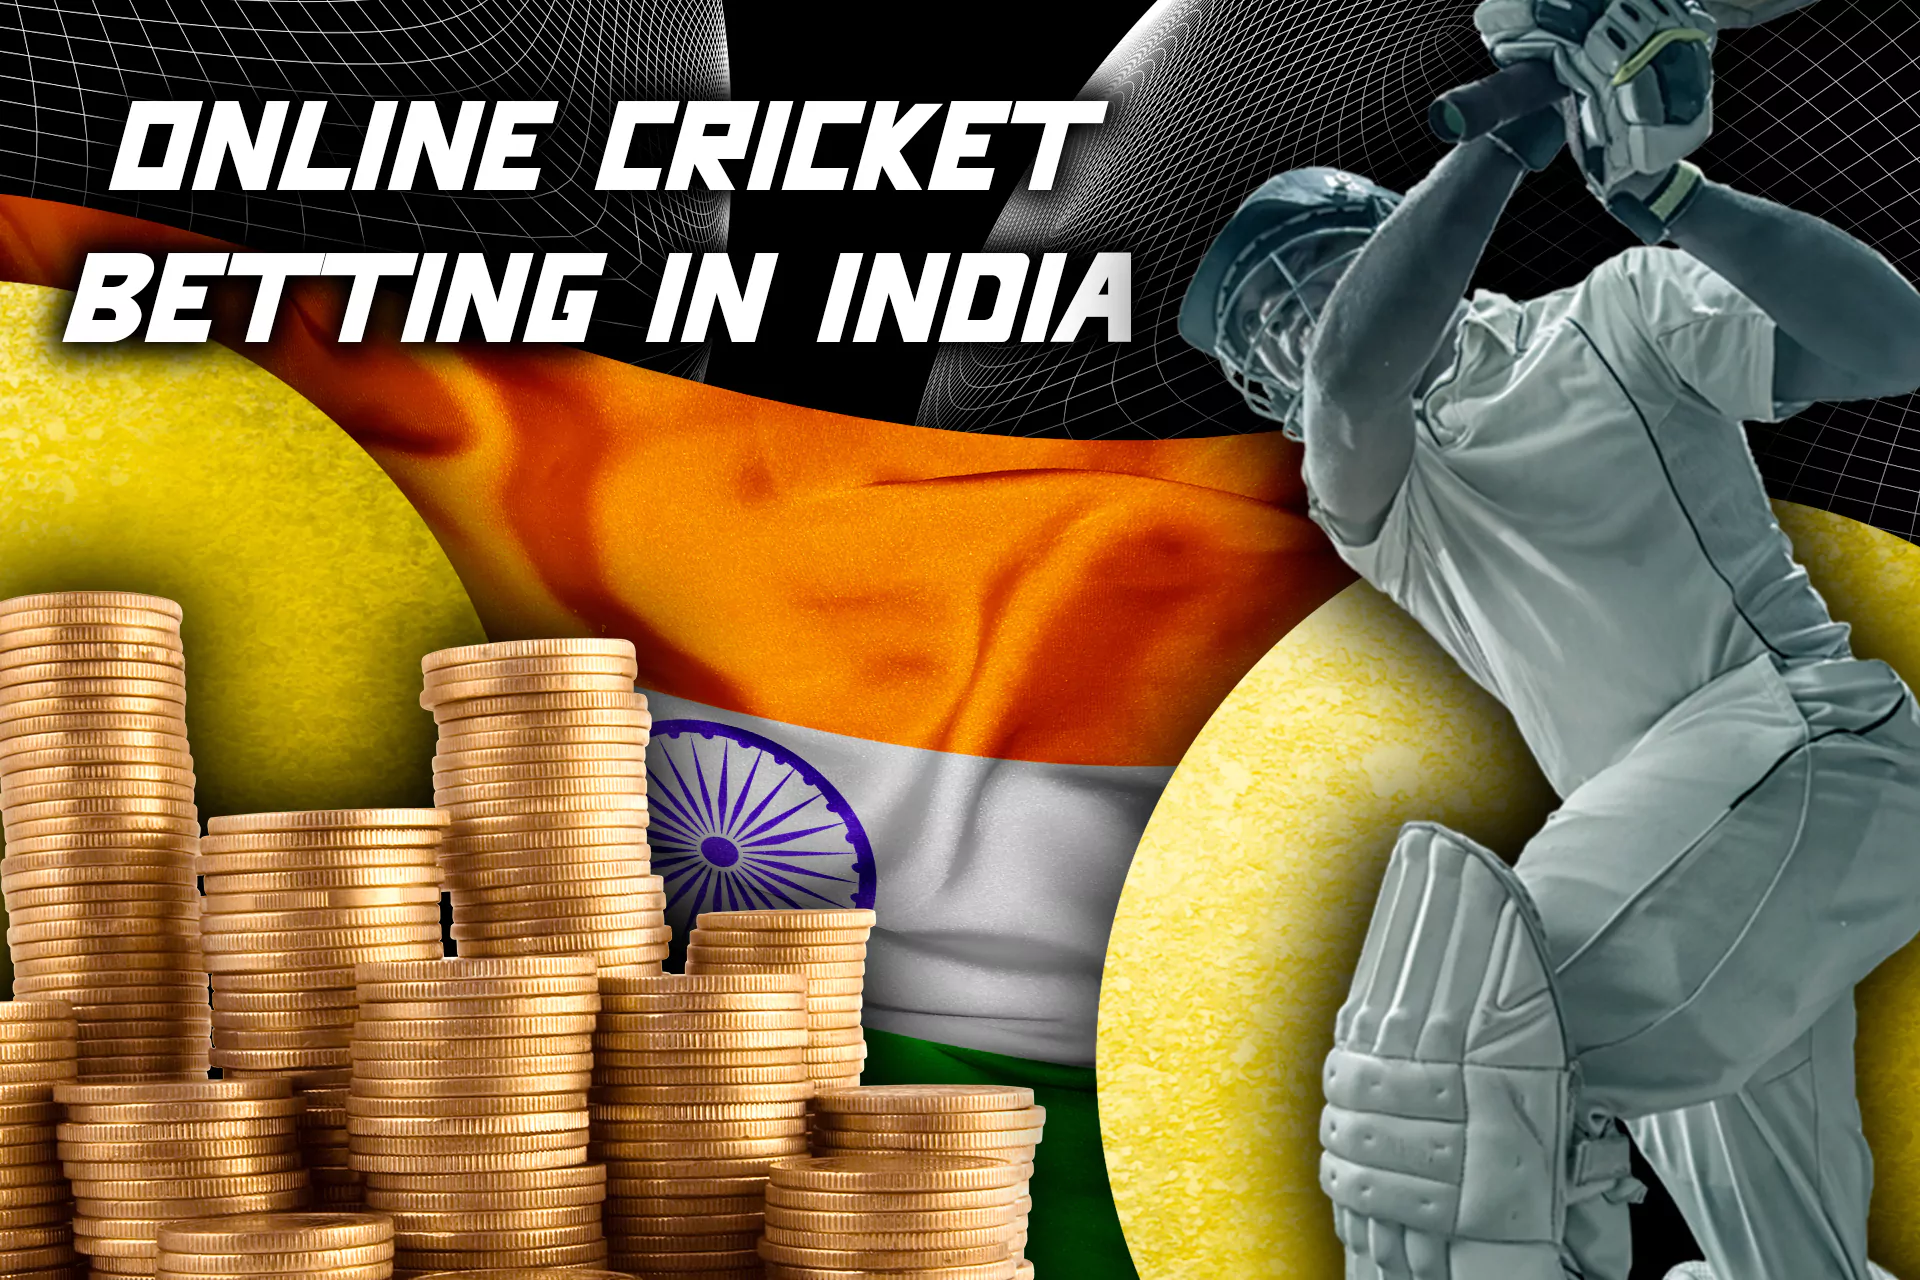 Online Cricket Betting is extrimal popular in India because of its ease of use, safe and legal.